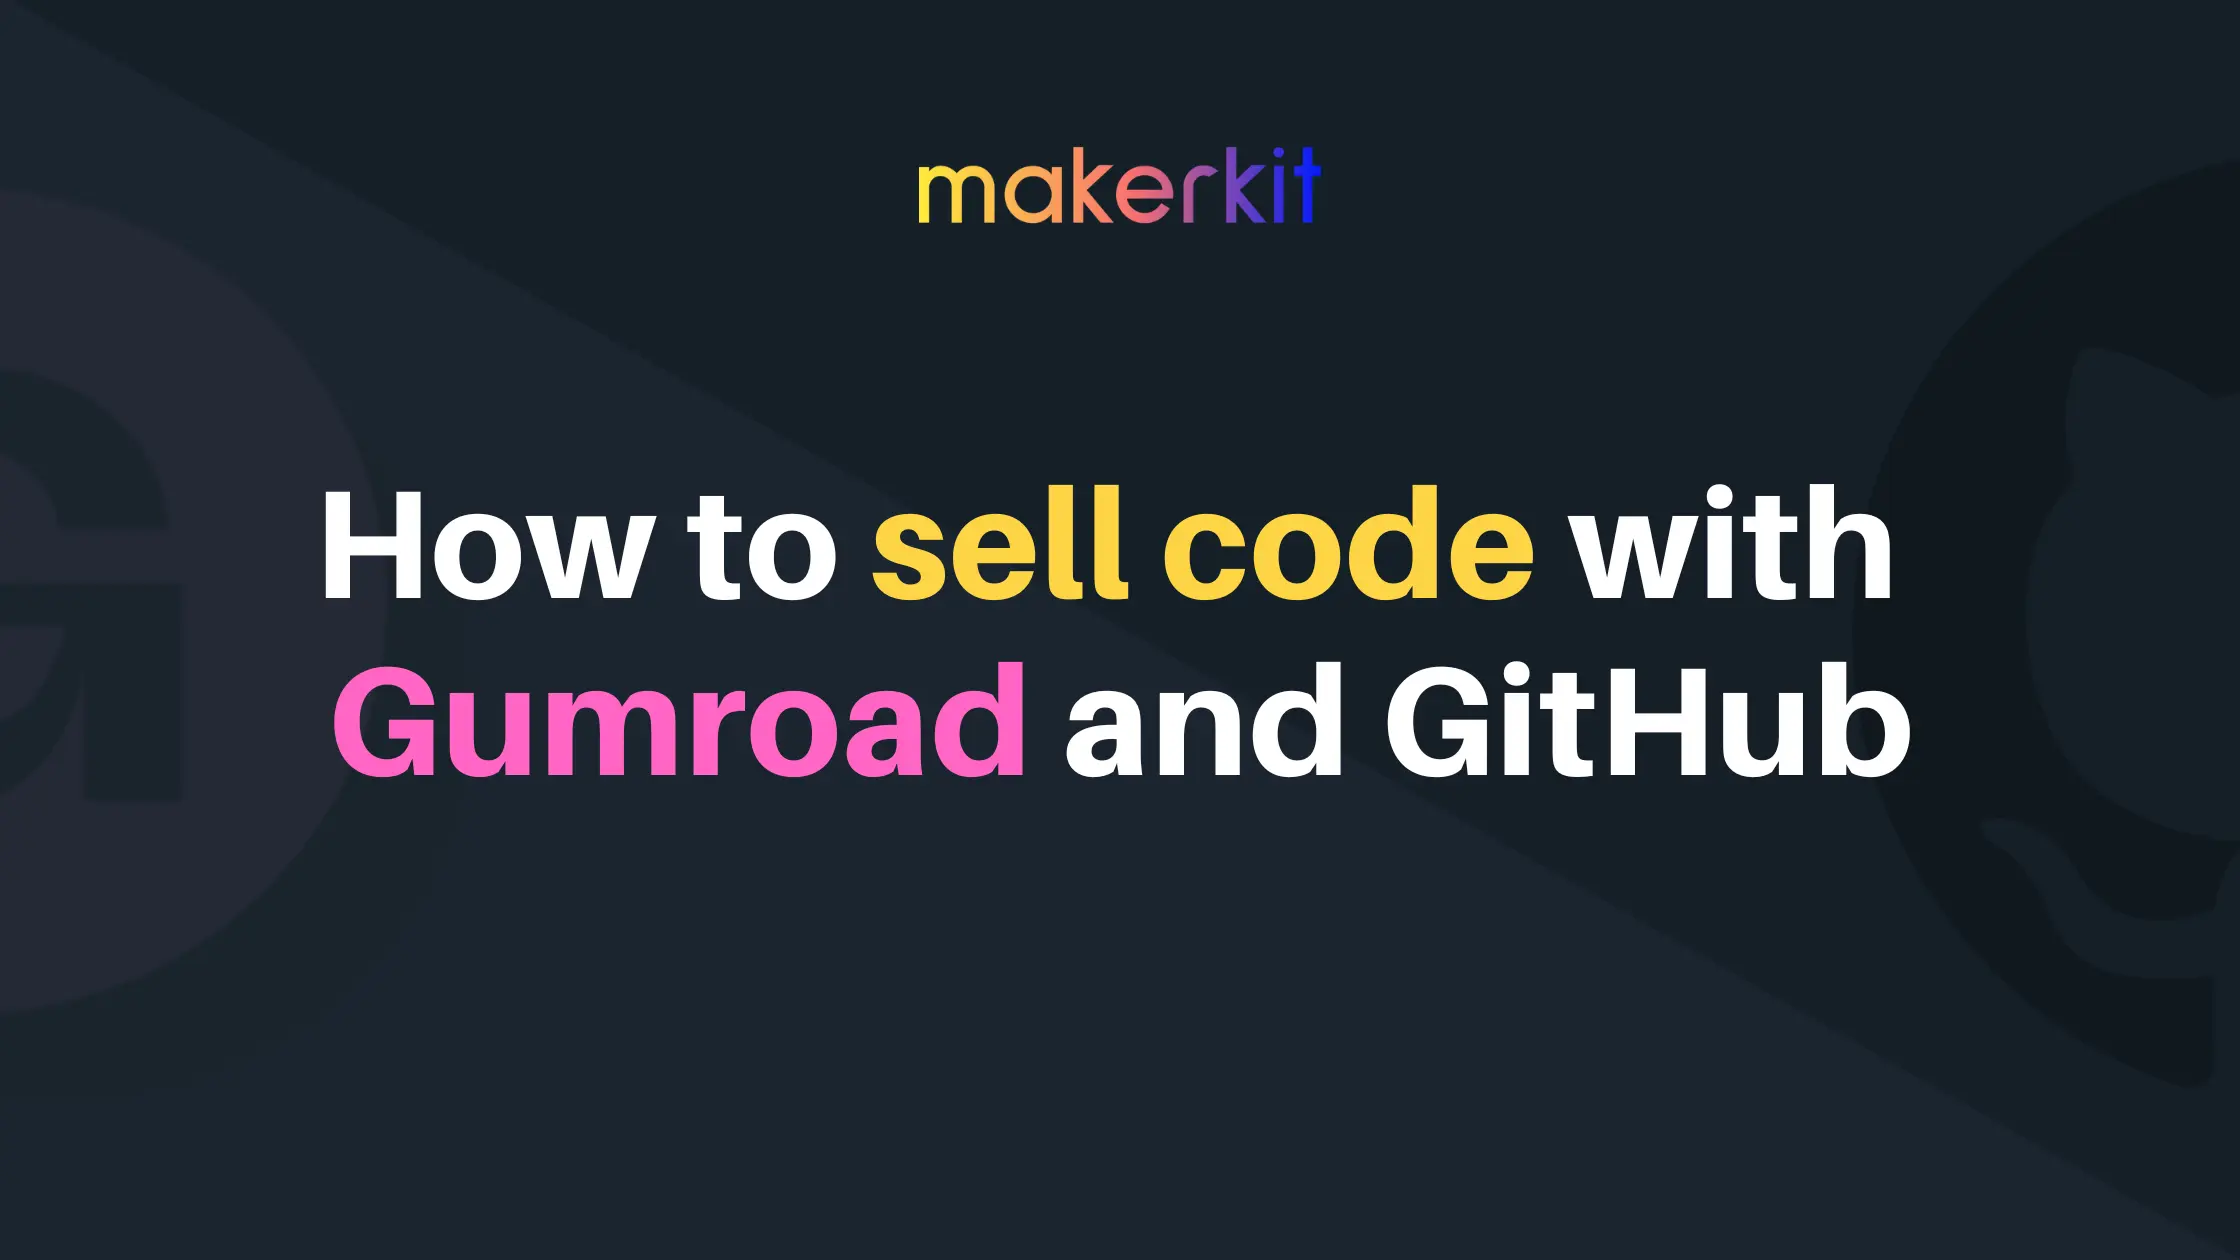 Cover Image for How to sell code with Gumroad and Github